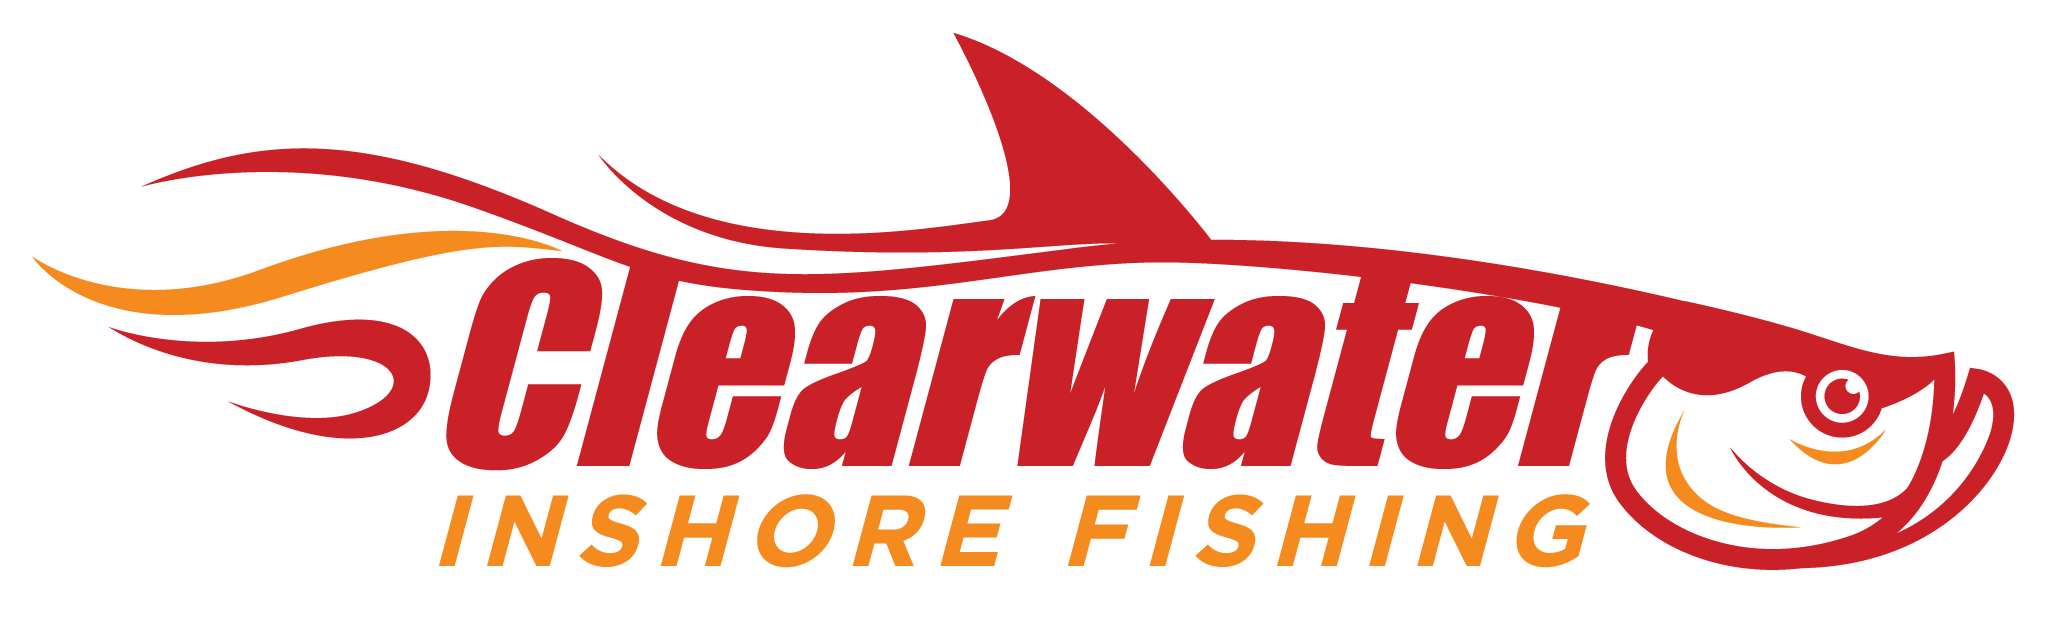 Clearwater Inshore Fishing Report for May